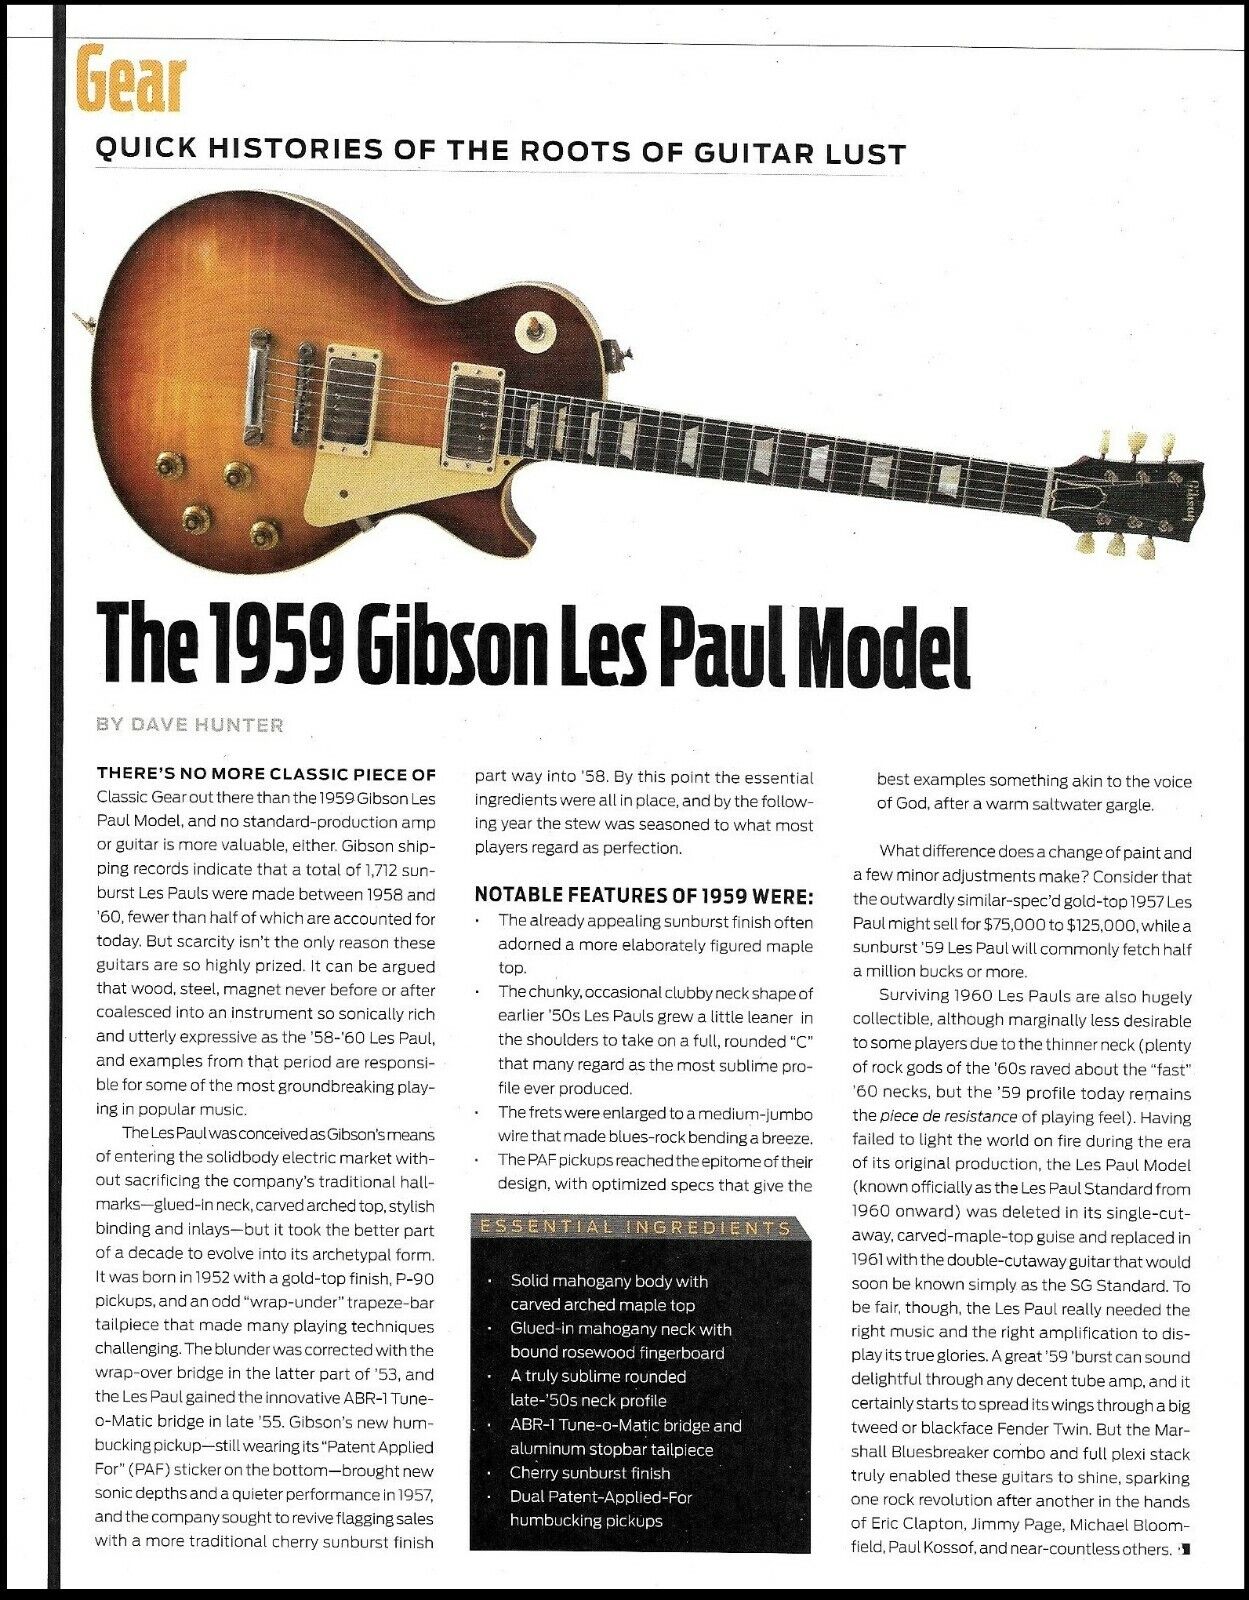 The 1959 Gibson Les Paul Model 2016 guitar history article 8 x 11 print